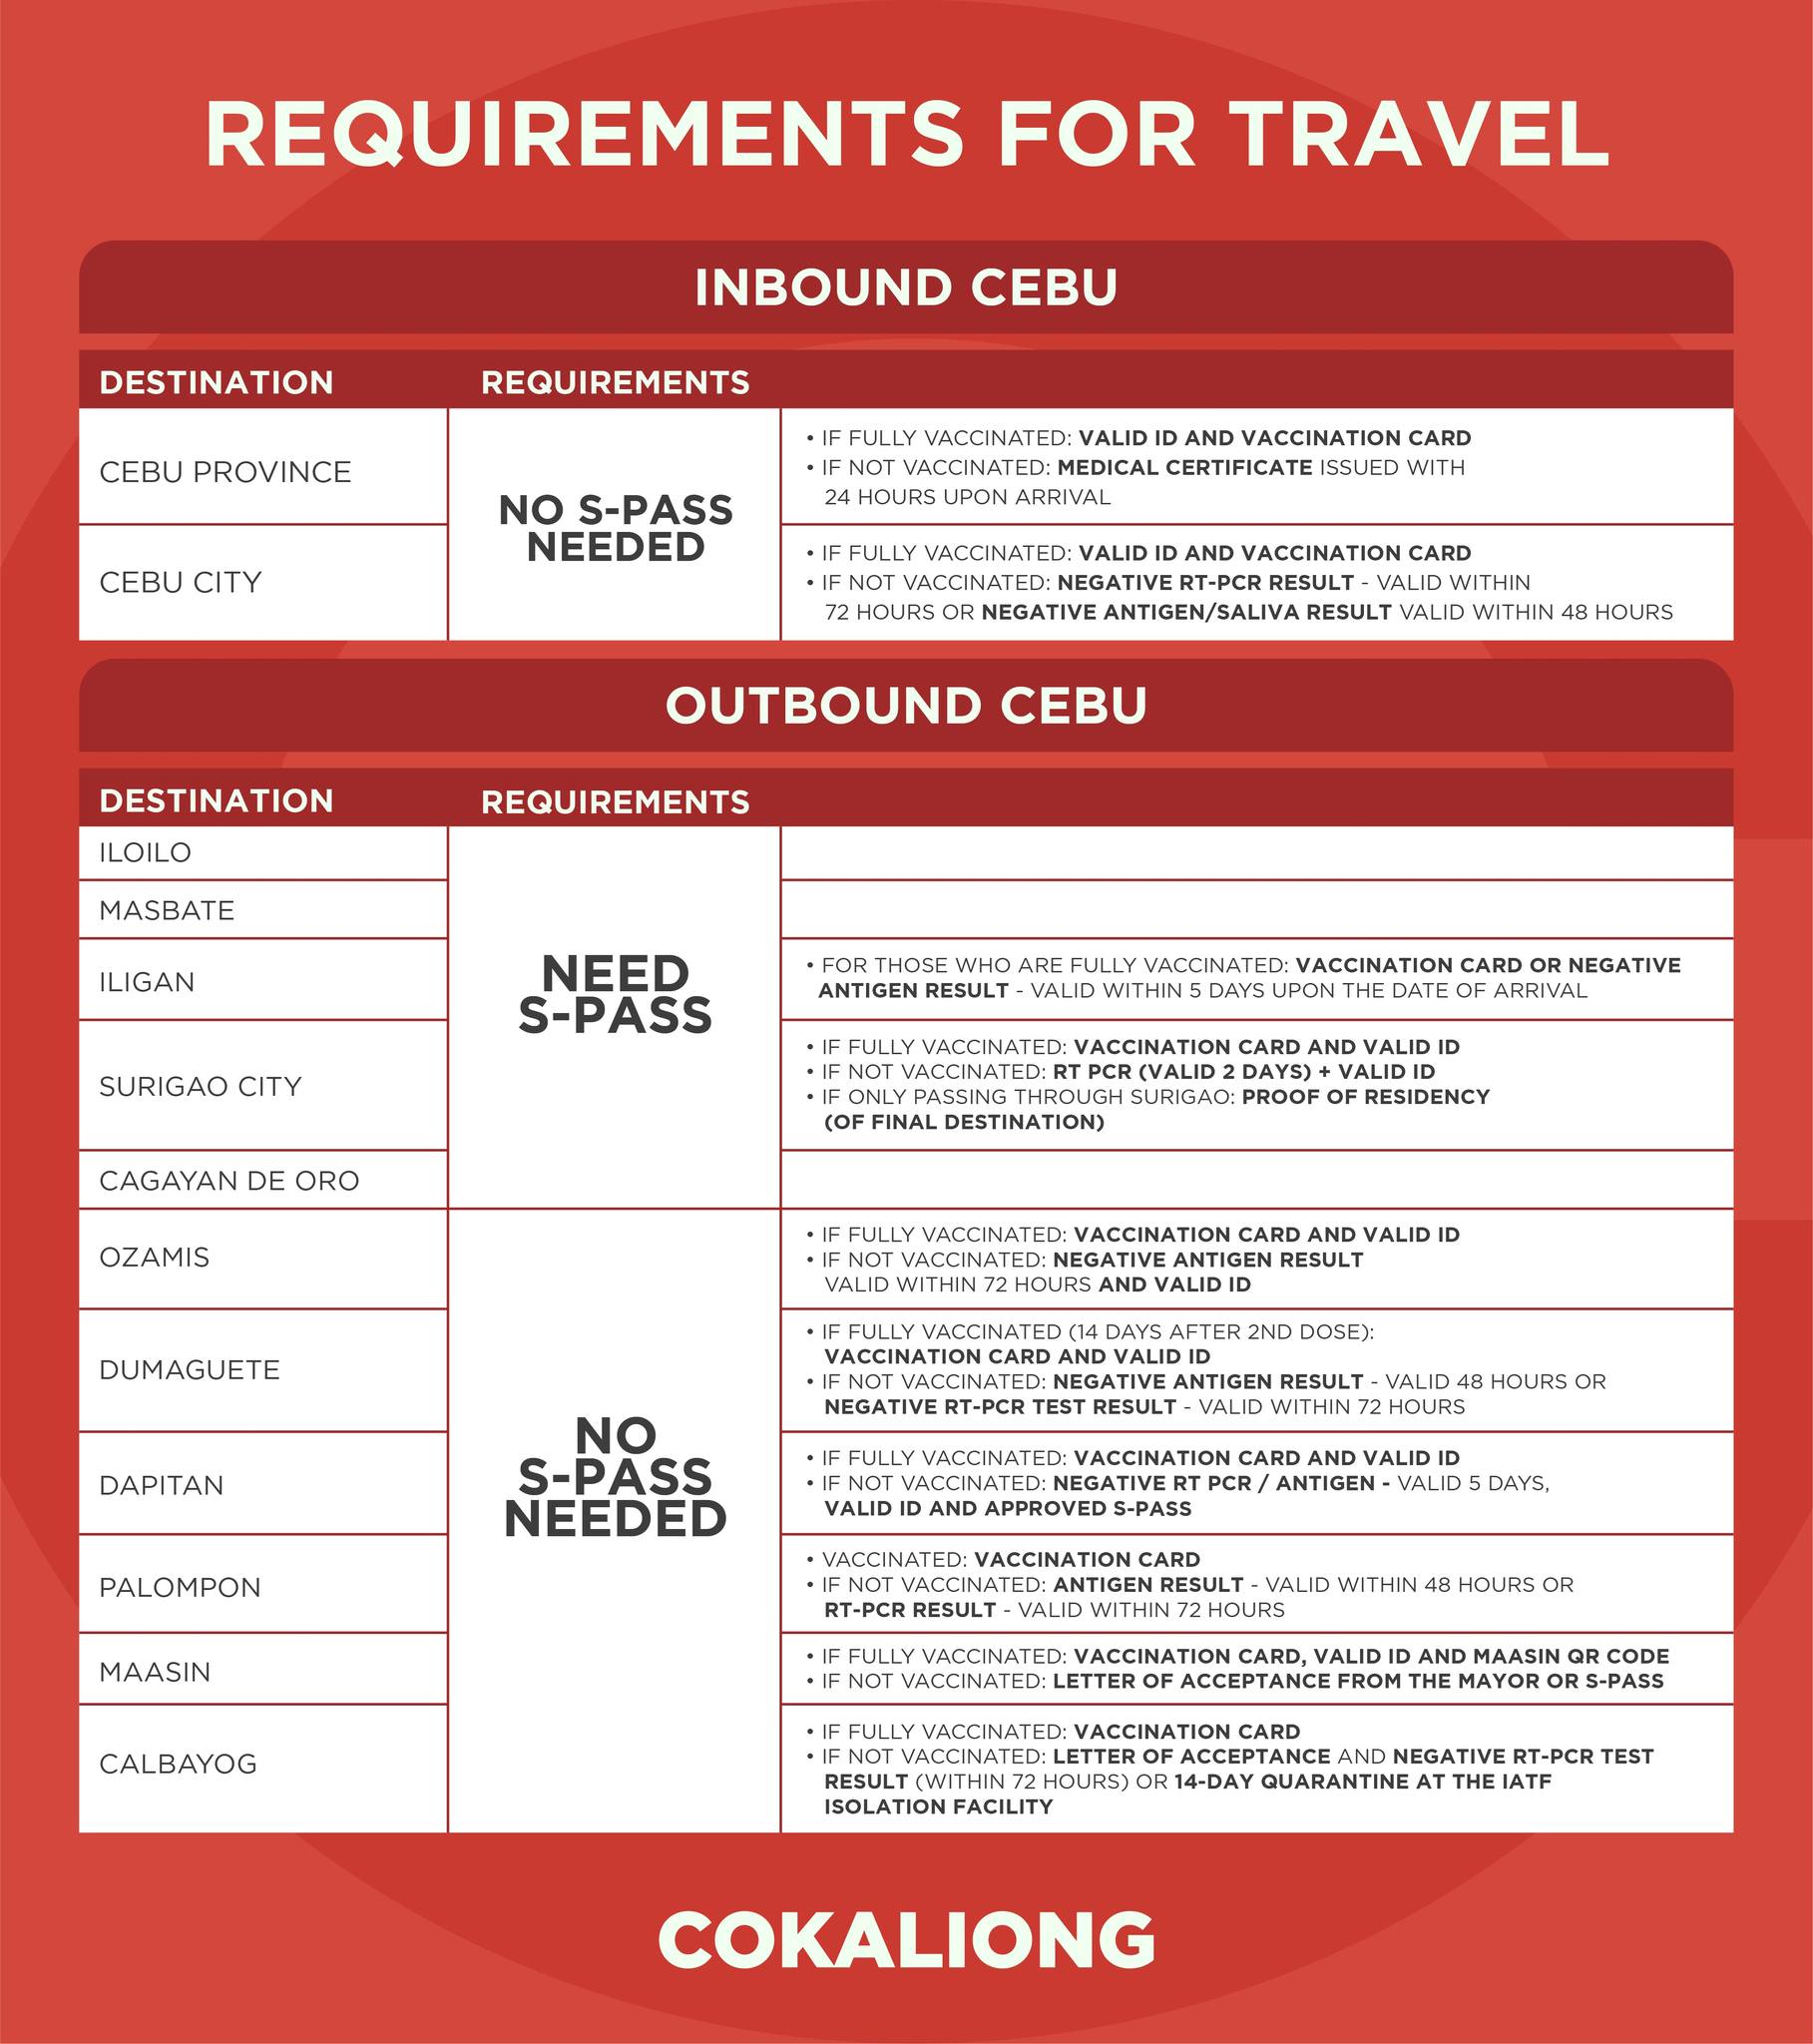 Cokaliong COVID-19 Travel Requirements